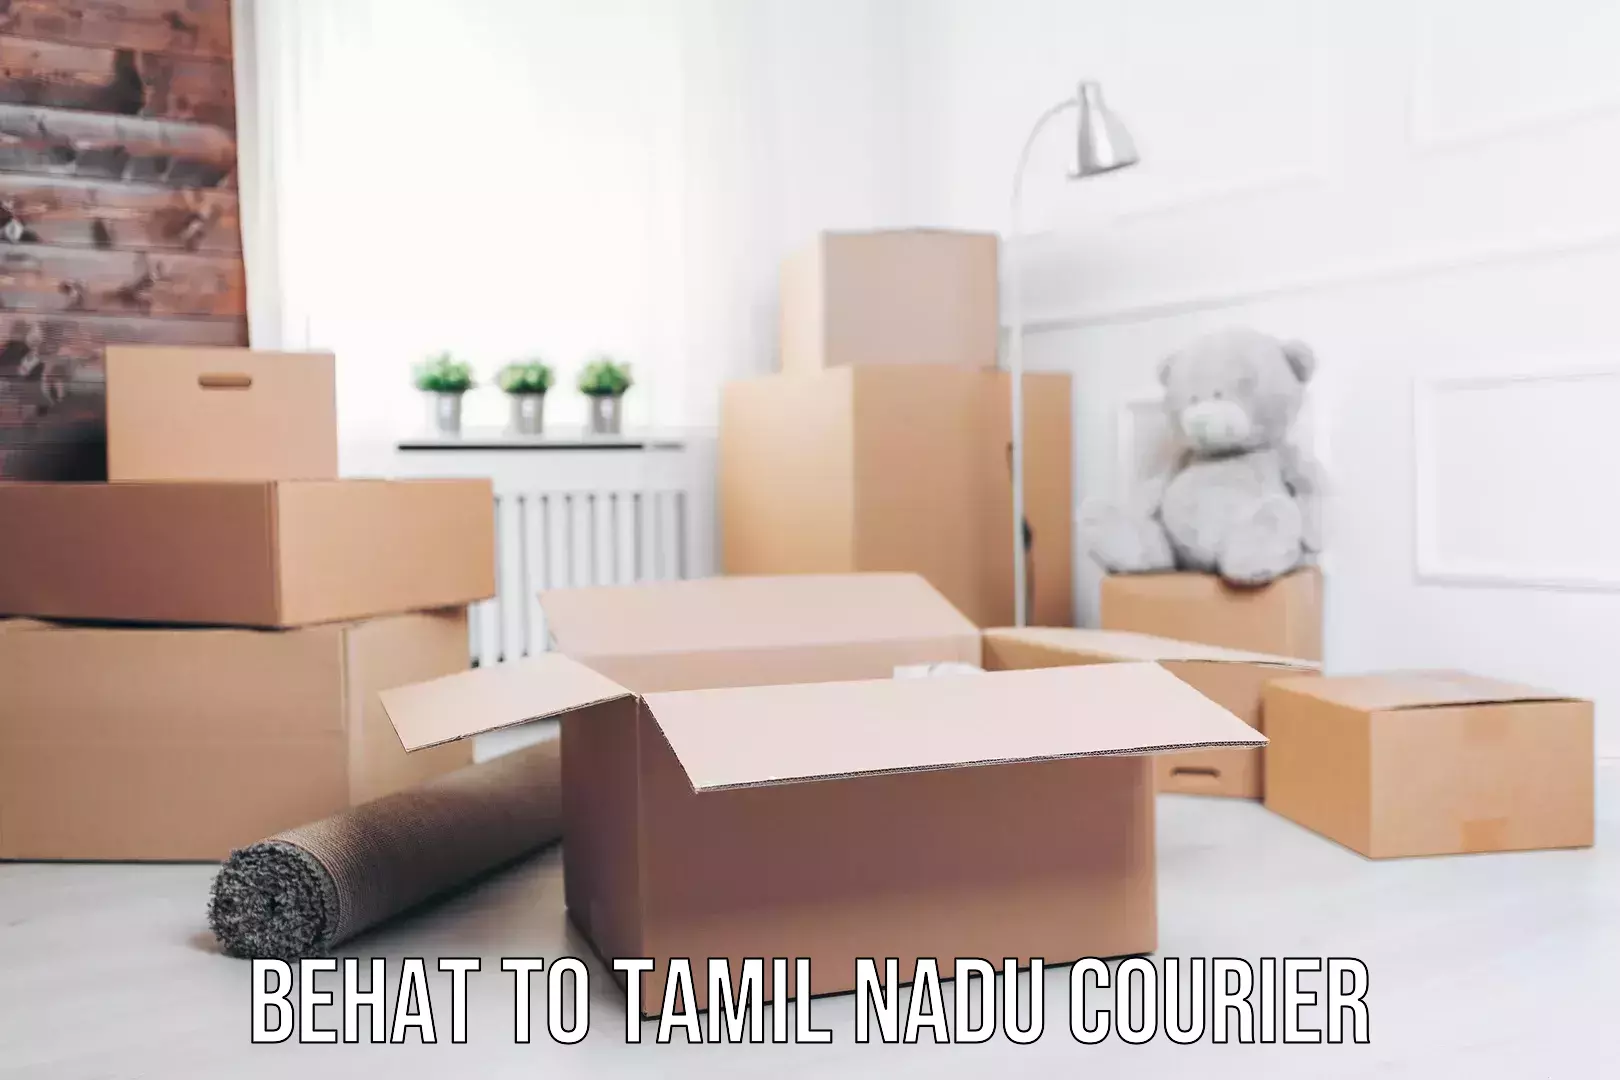 Postal and courier services Behat to Tamil Nadu